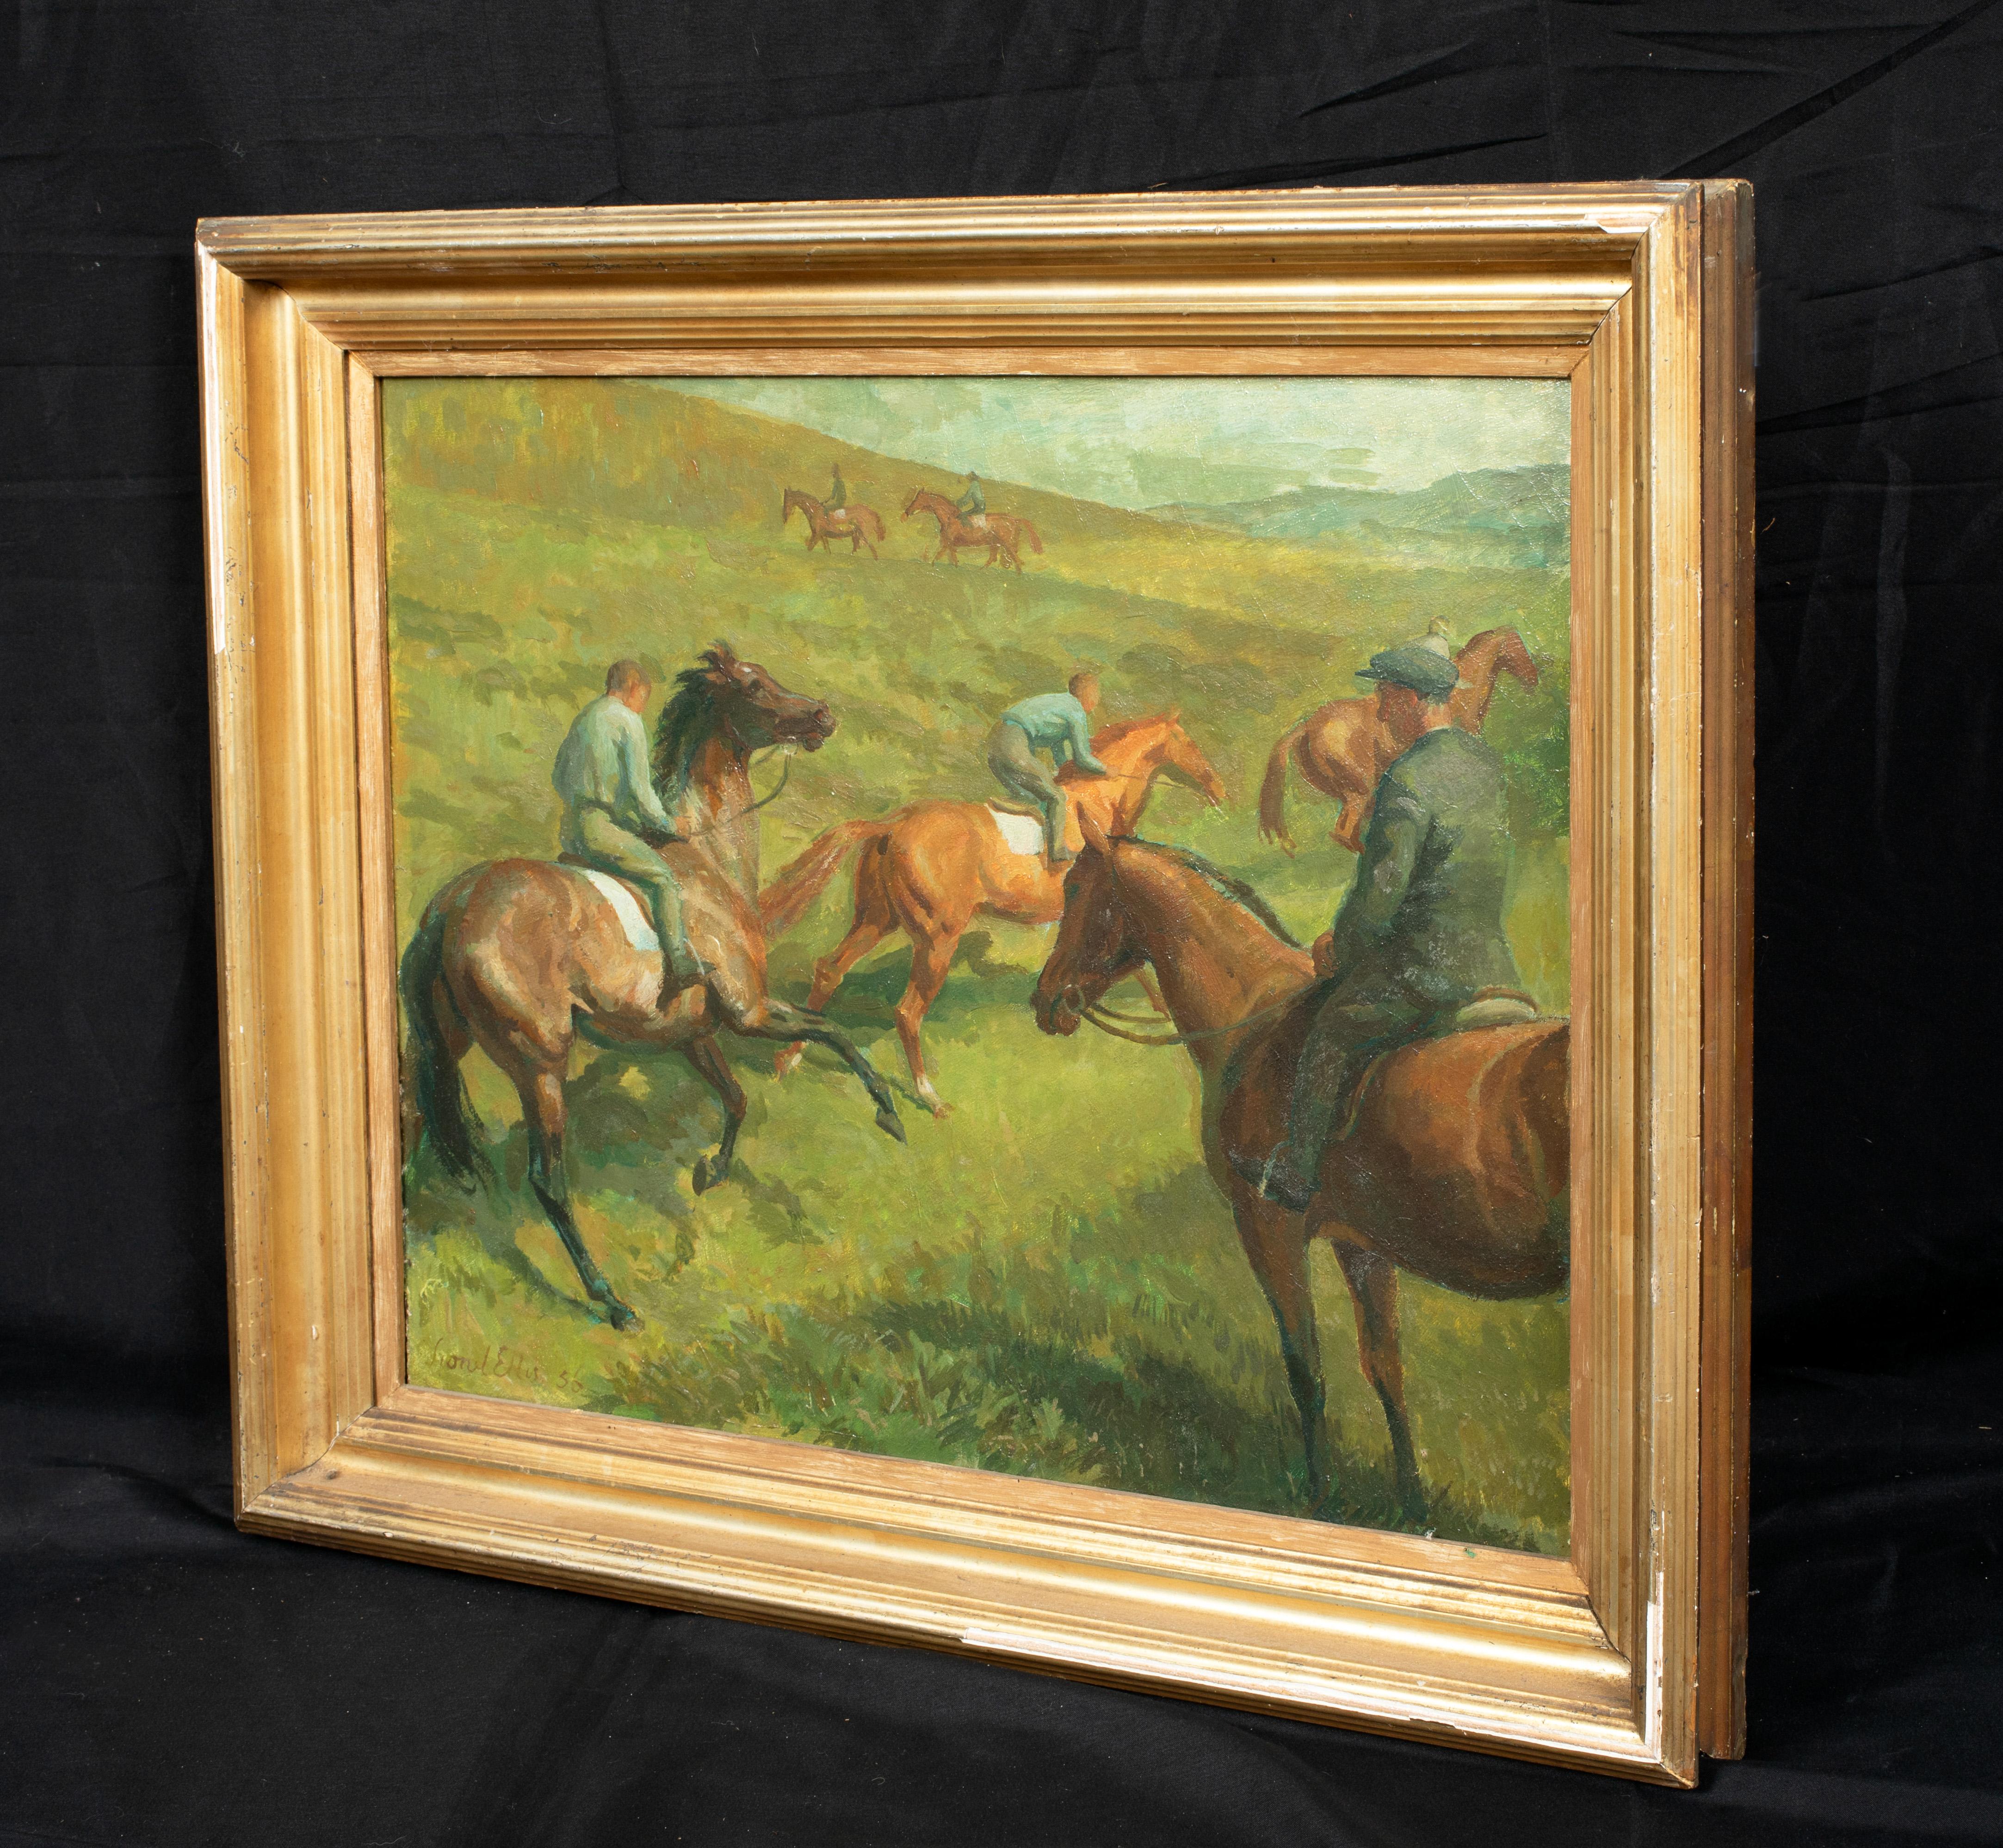 Horses & Jockeys, early 20th Century 

by Lionel ELLIS (1903-1988)

Fine early 20th century portrait of a jockeys and horses in an open landscape, oil on panel. Good quality and condition example of the Ellis's work, framed and signed.

Provenance: